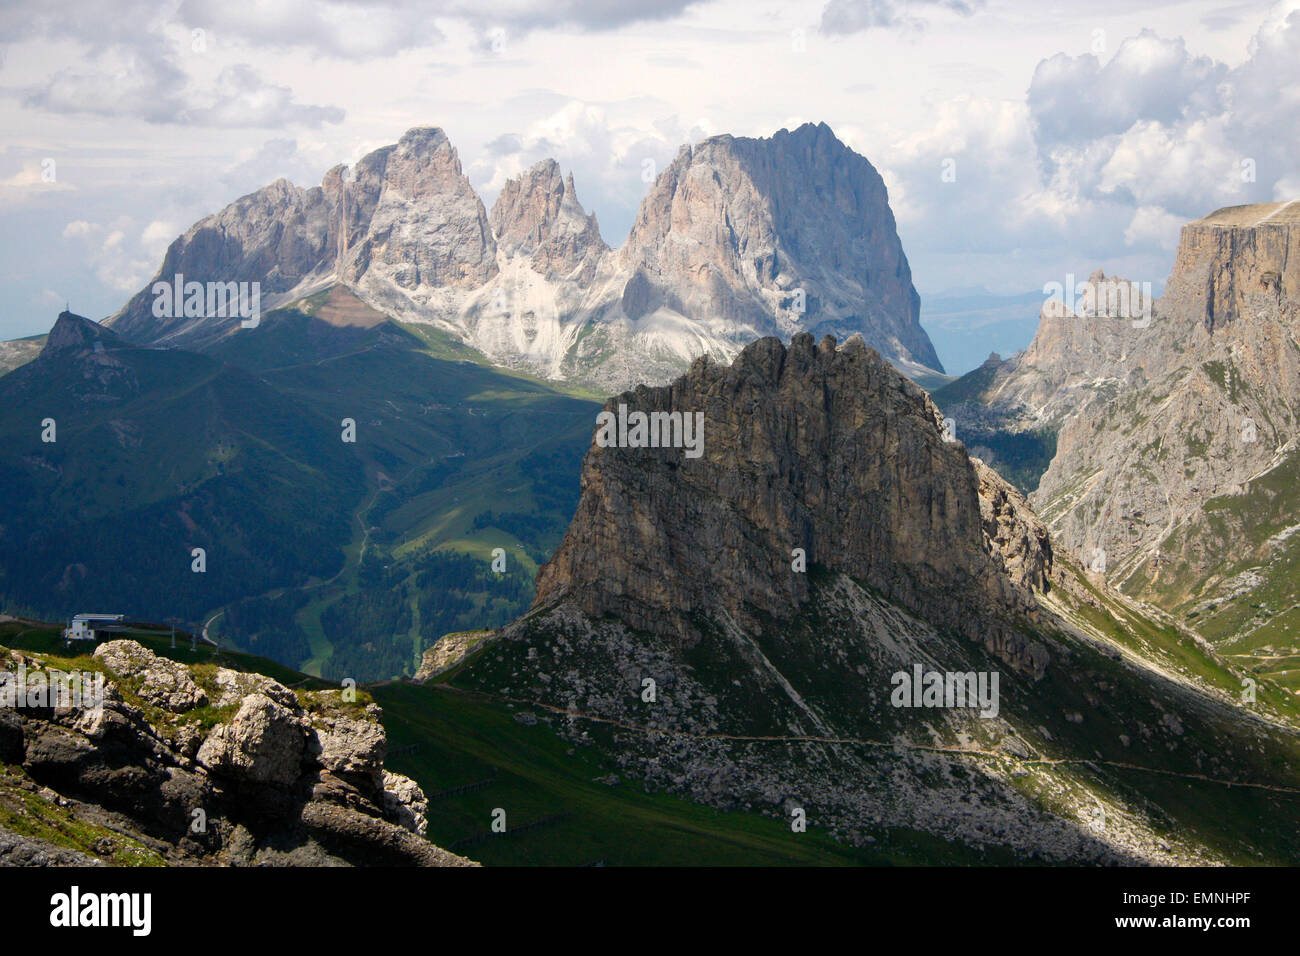 Sv0708 High Resolution Stock Photography and Images - Alamy